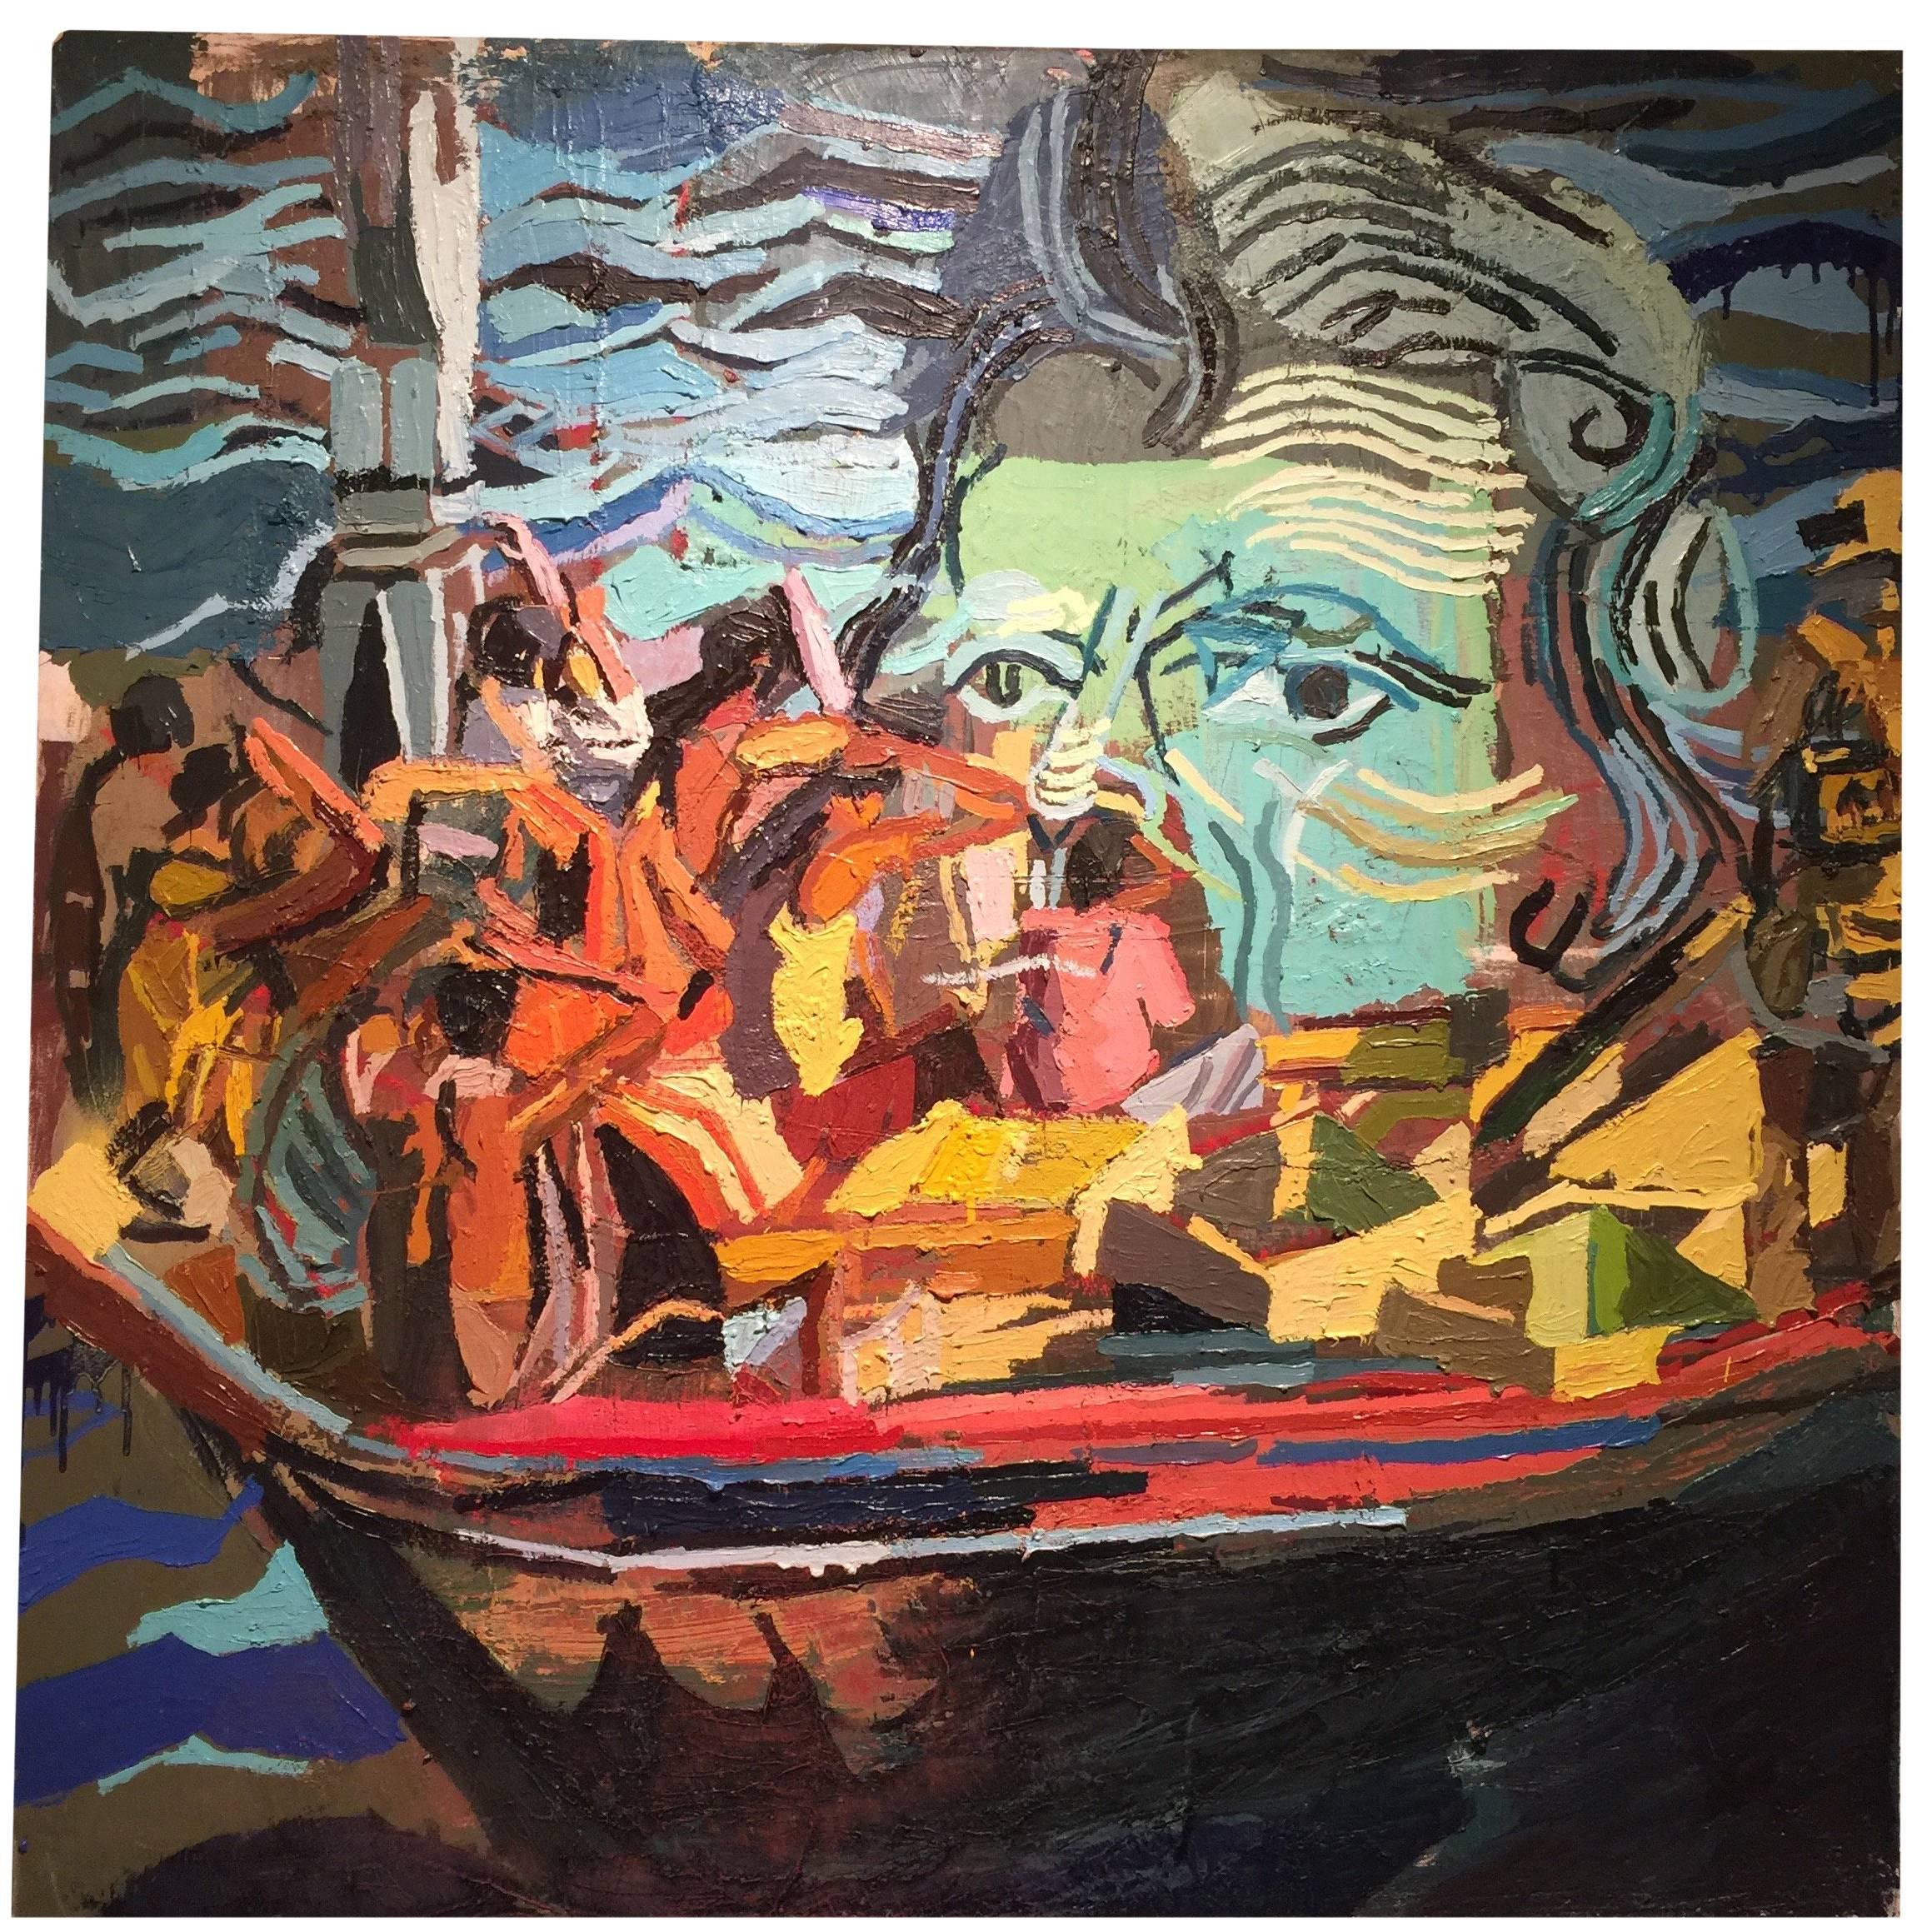 Somali Pirates with Jackson Oil Painting by New York Artist Clintel Steed, 2014